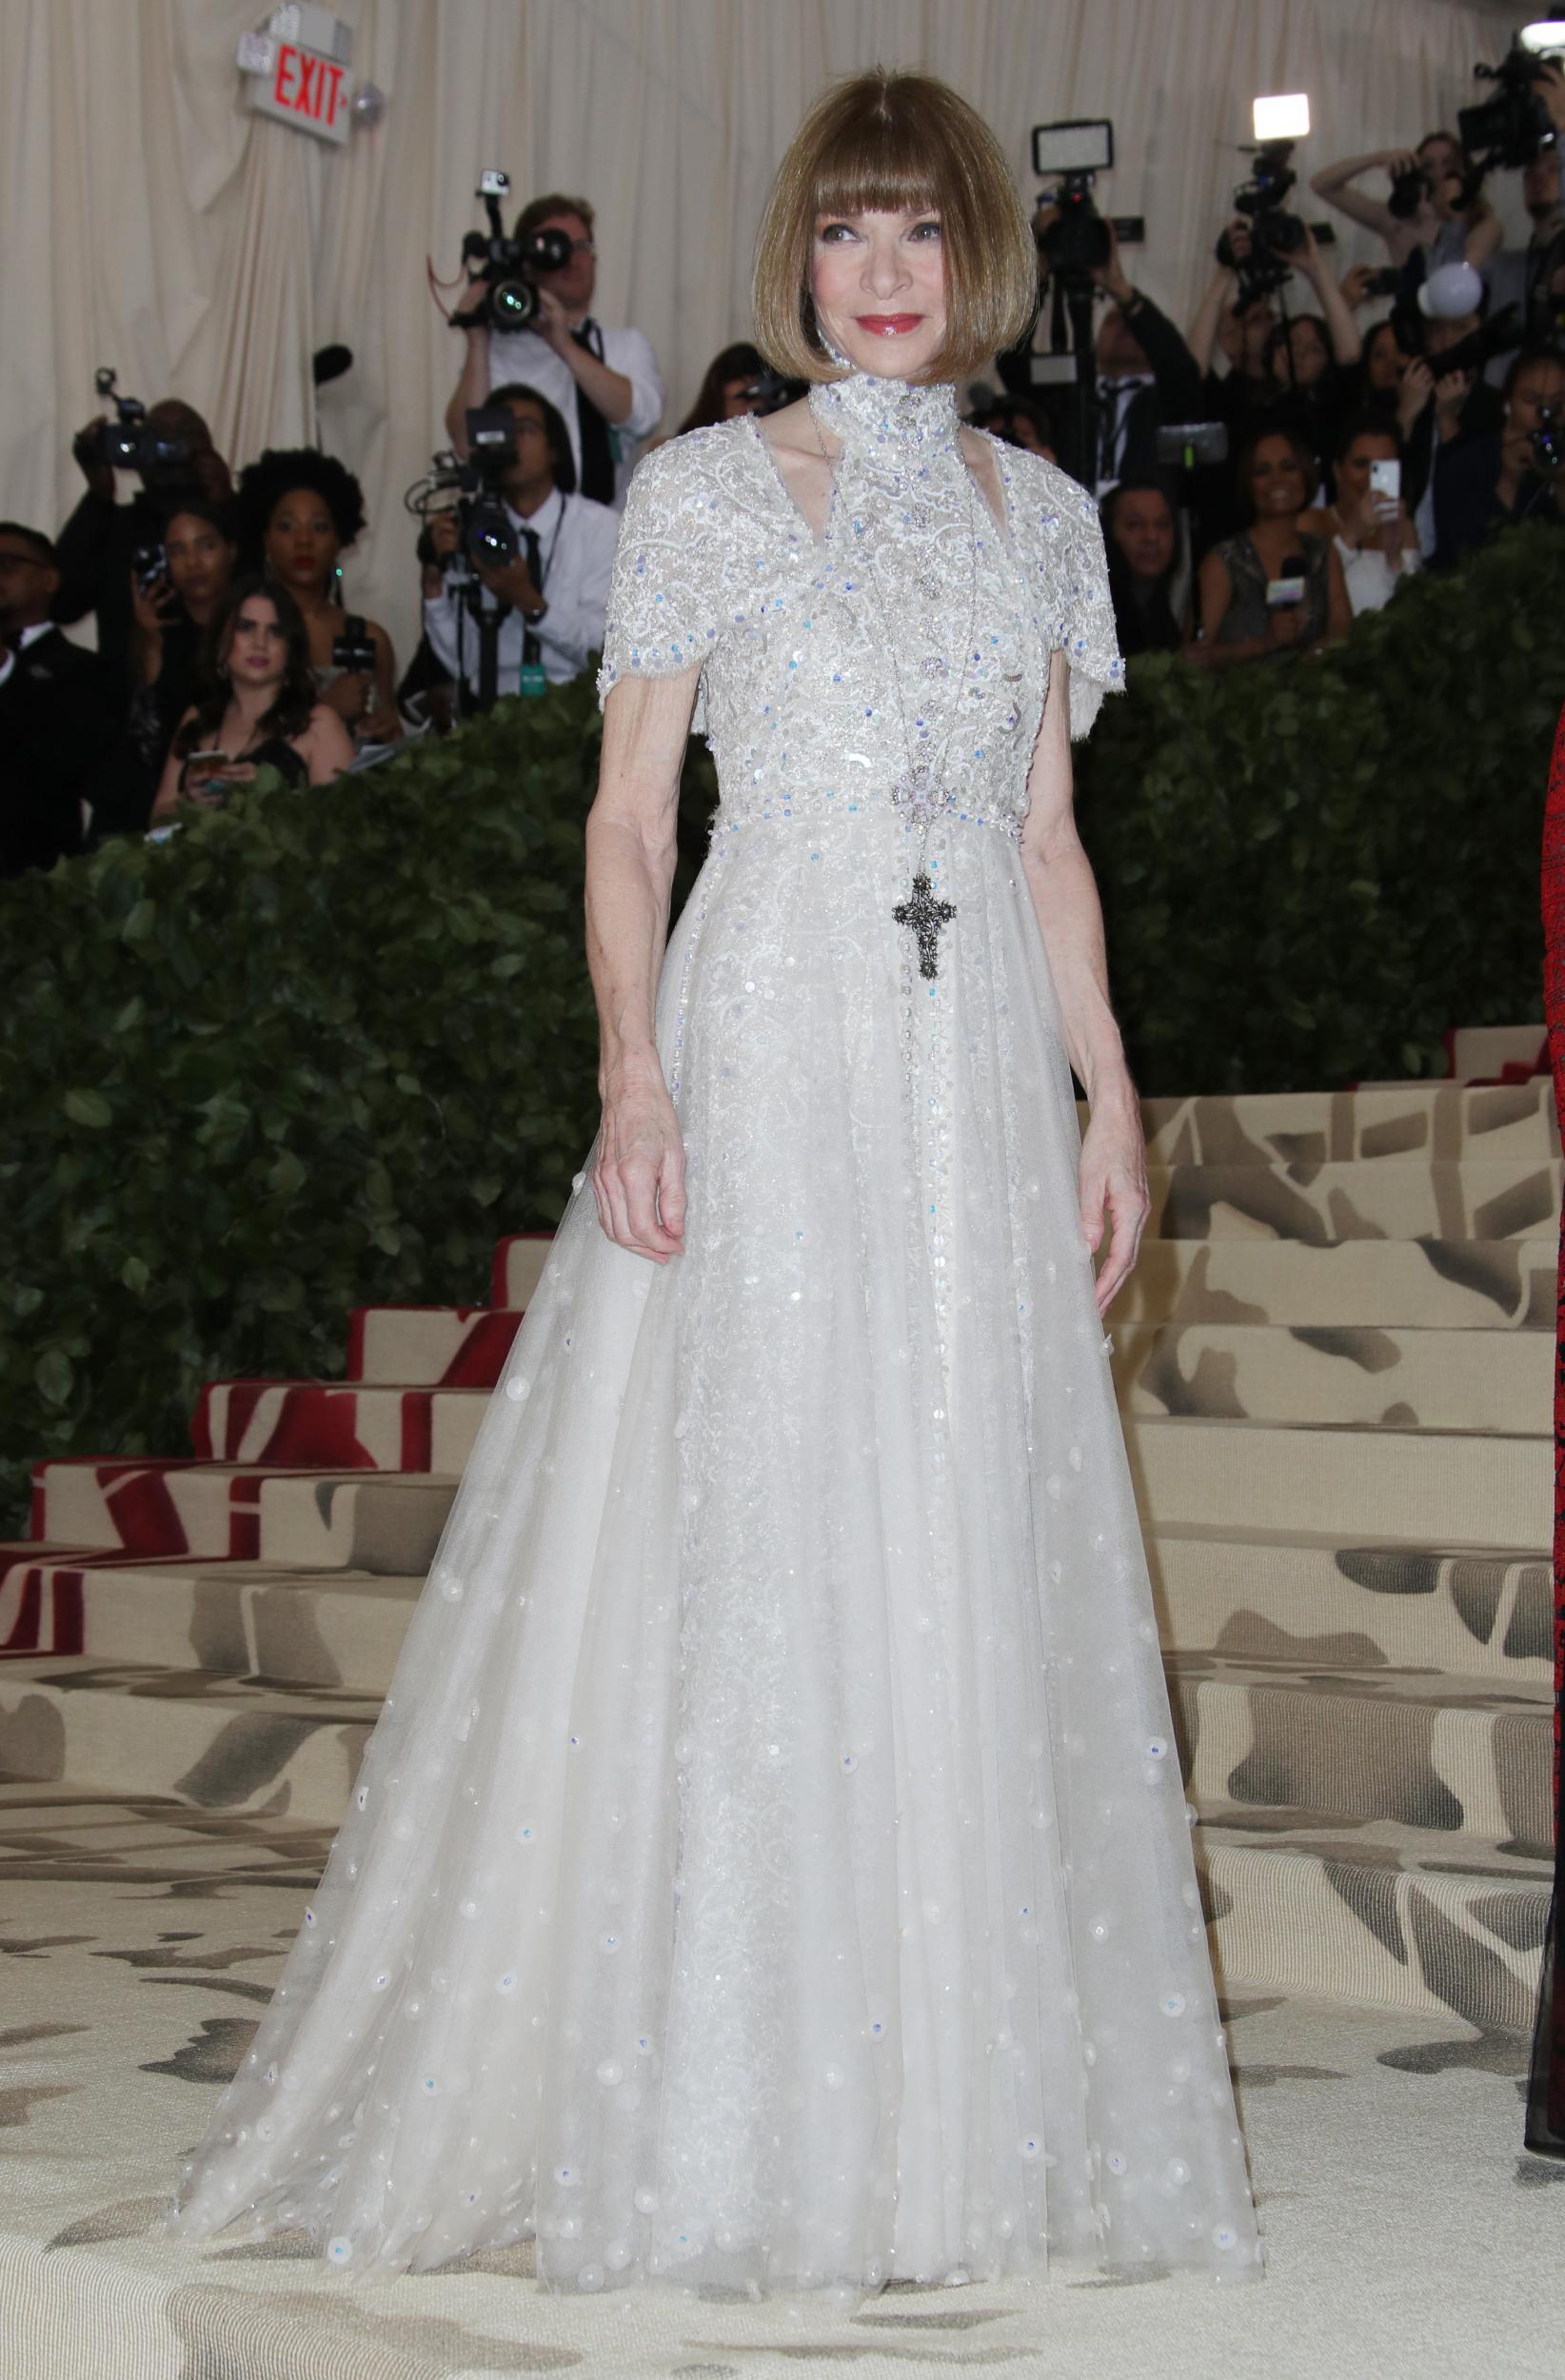 Anna Wintour in Chanel Couture at the 2018 MET Gala